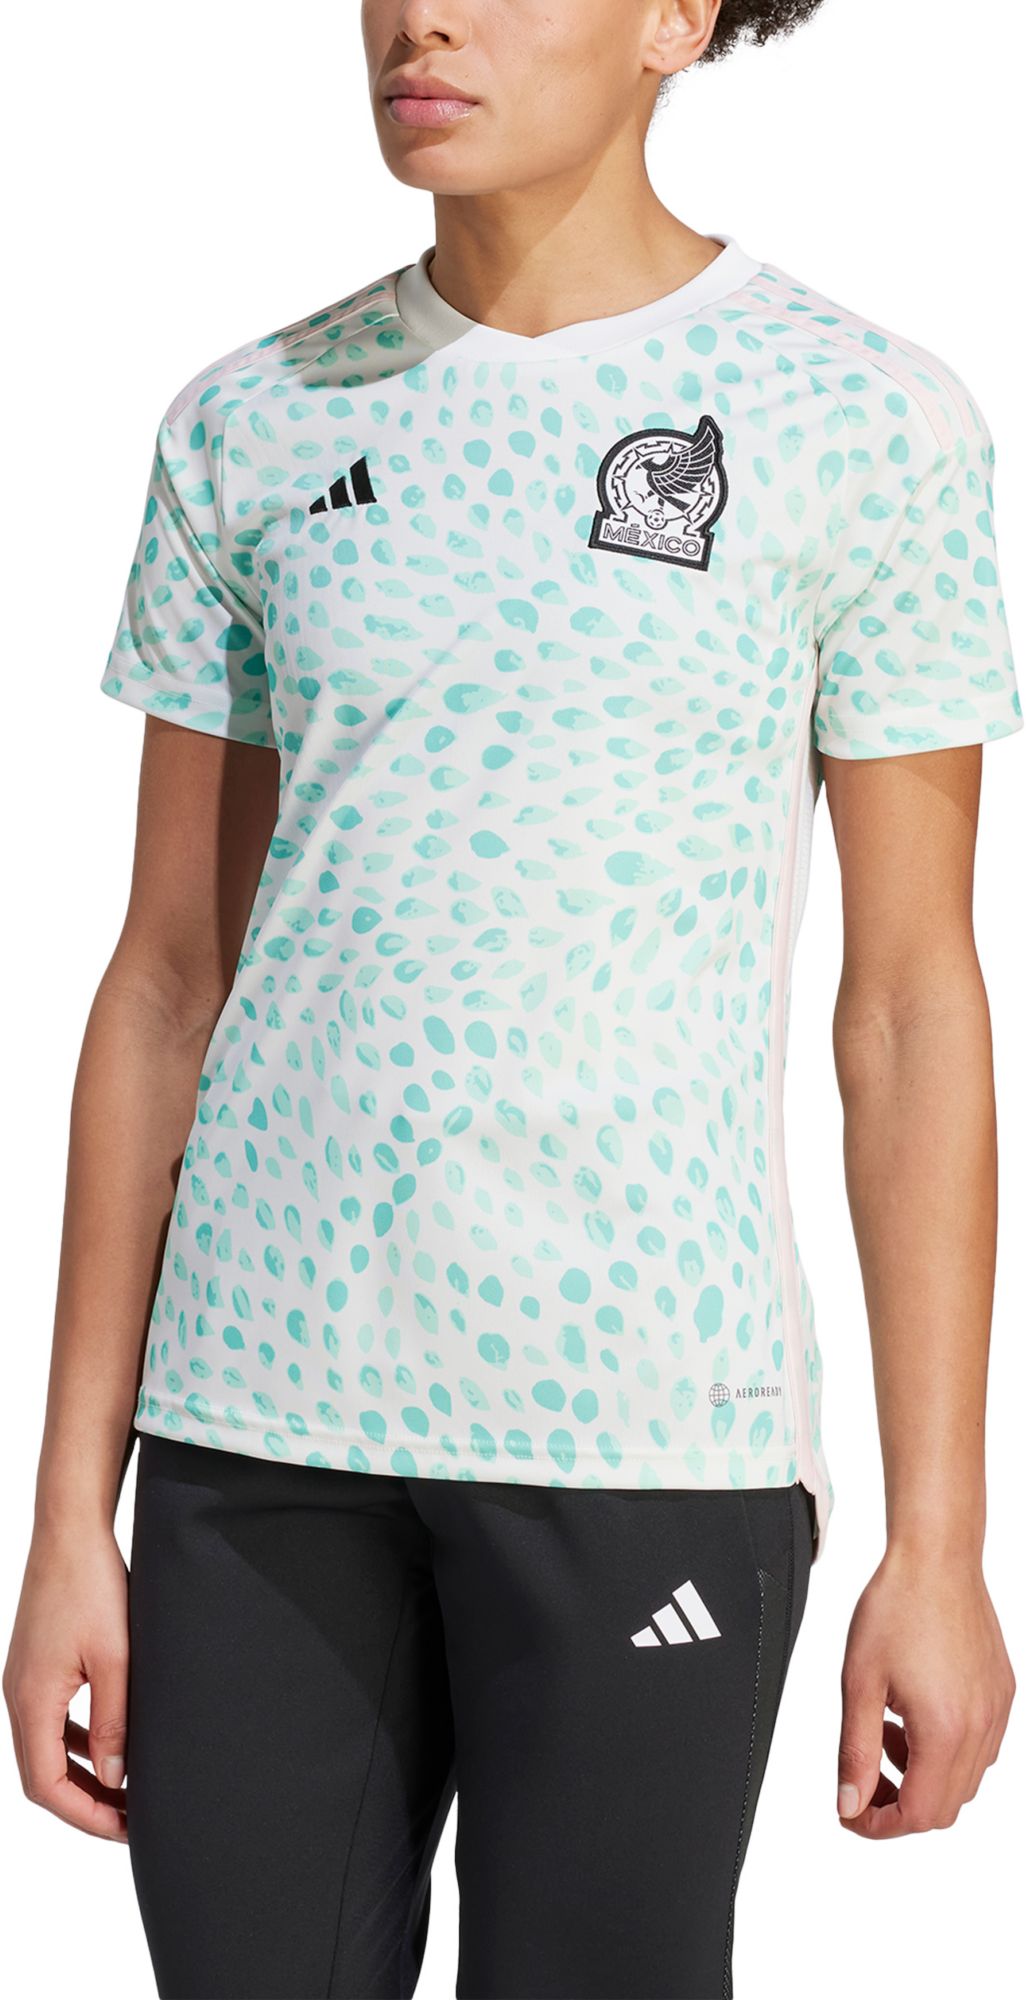 mexico world cup jersey women